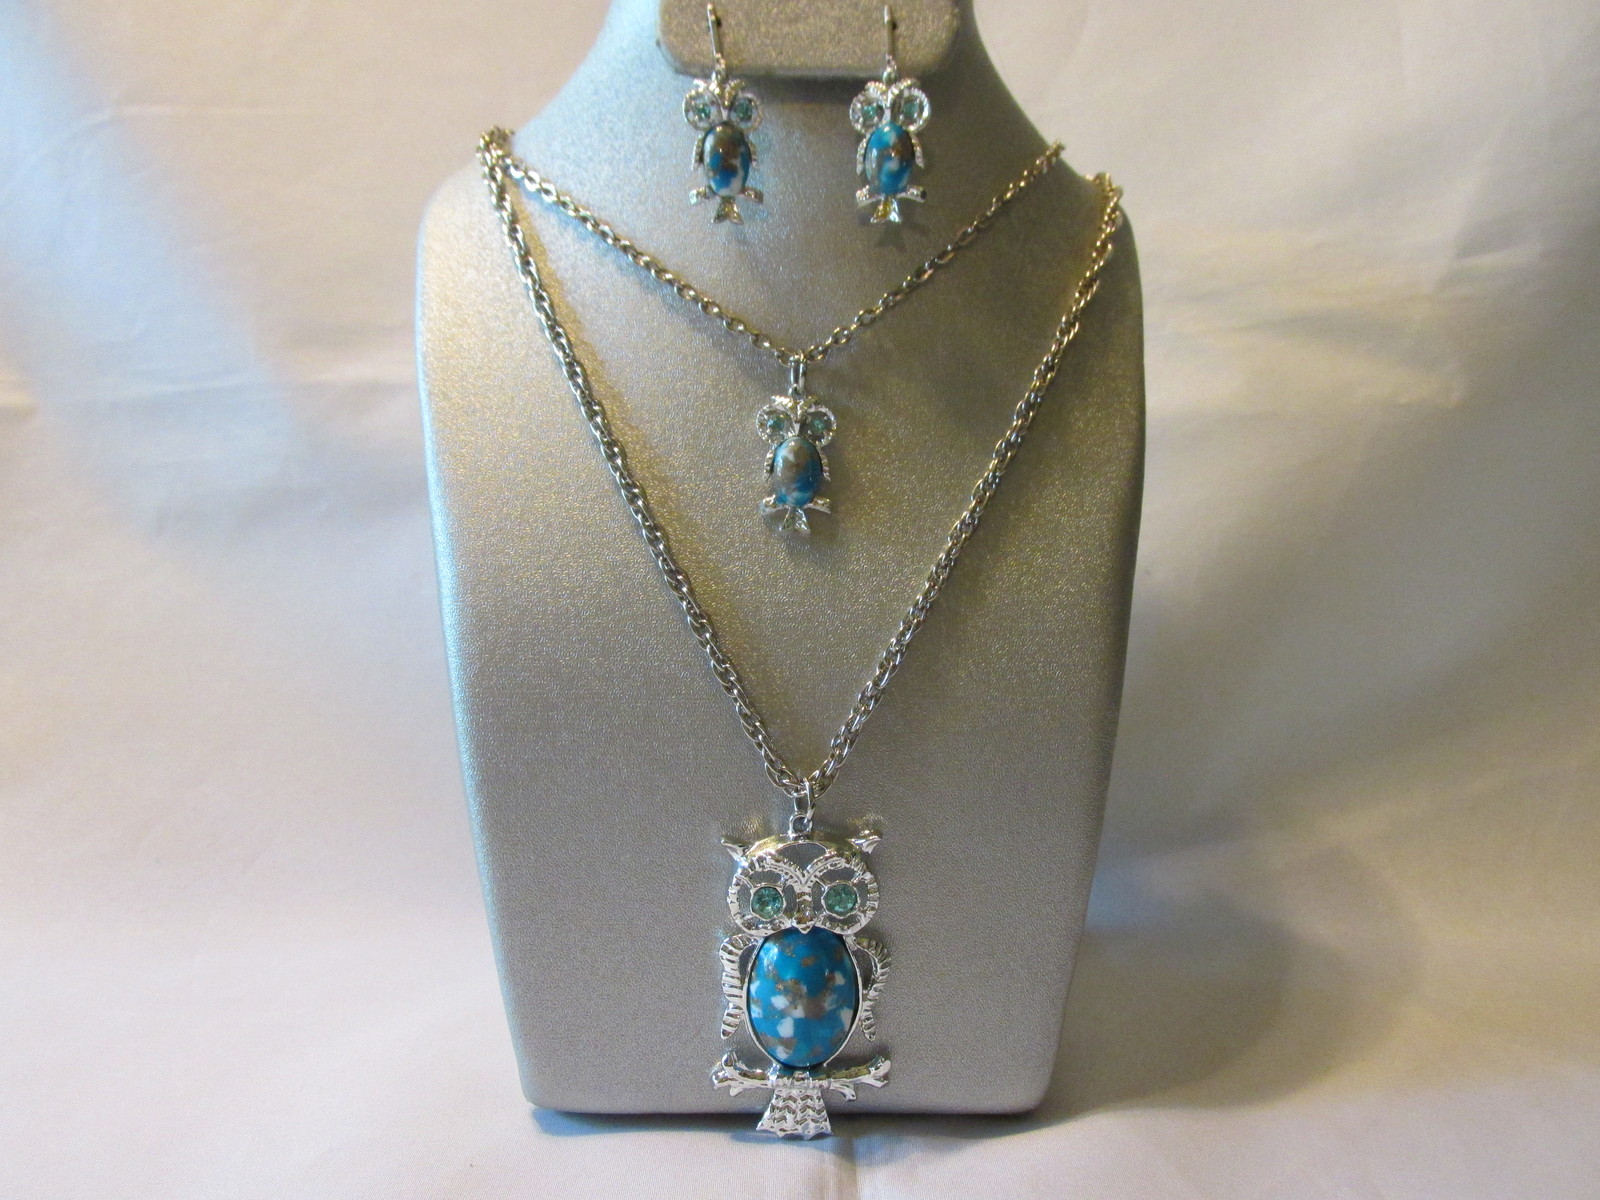 Primary image for Vintage Large & Small Owl Double Pendant Necklace & Earrings Set, Faux Turquoise